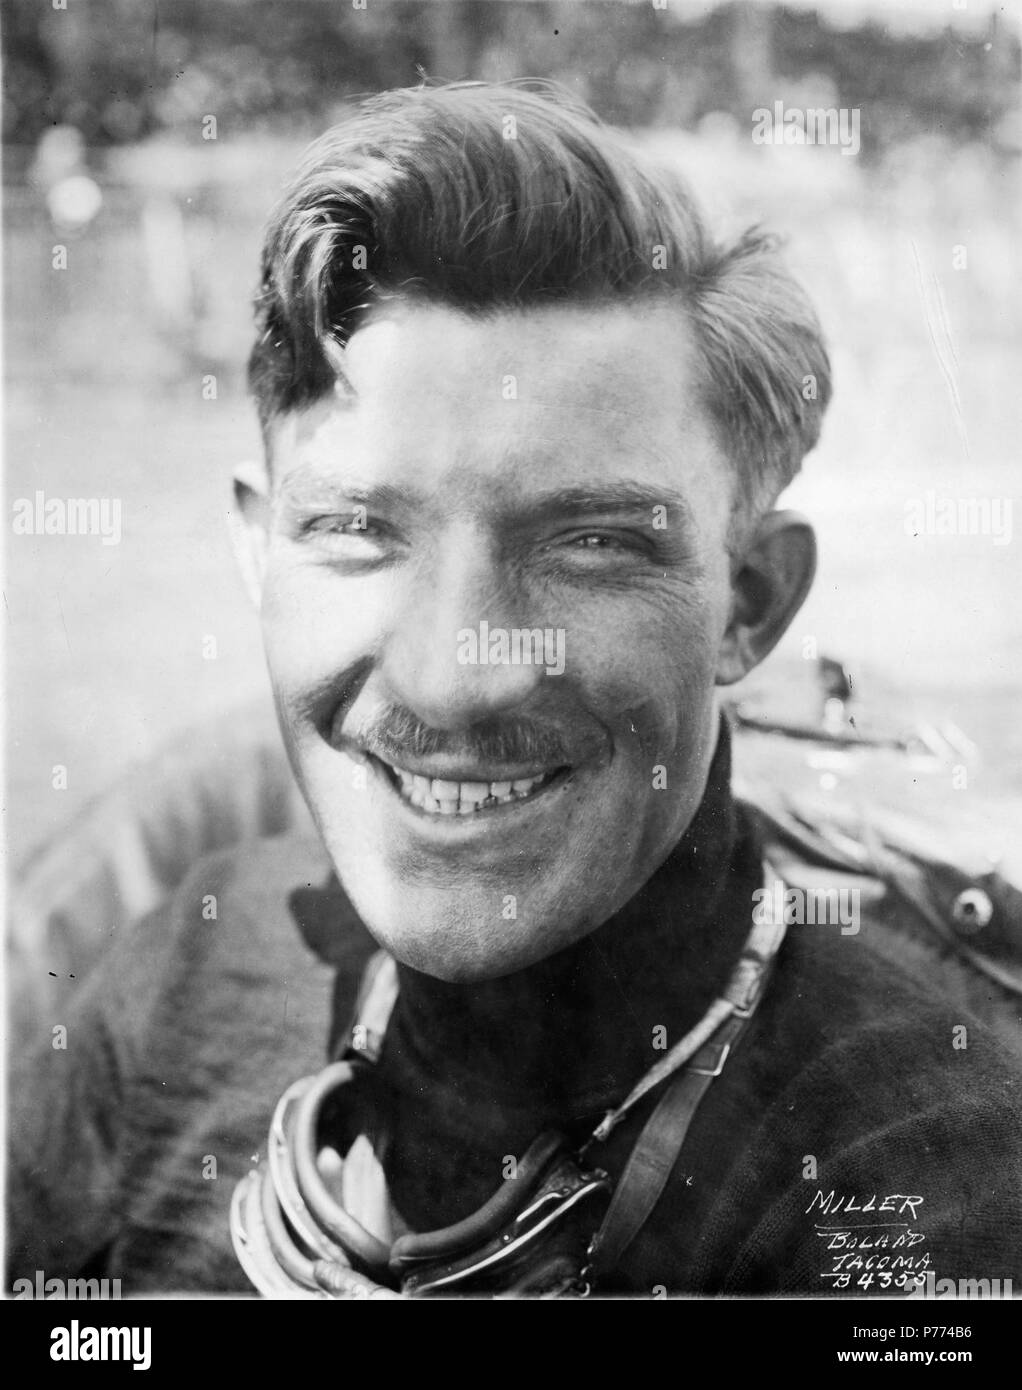 . Marvin D. Boland Collection BOLAND-B4355. ca. 1921. Informal close-up portrait of auto racer, Eddie Miller. Mr. Miller, part of the powerful four-car Duesenberg team, paid his third visit to Tacoma's Speedway in 1921. He picked up his bride from back East before arriving in Tacoma in late June, following the path laid by his former teammate, Tommy Milton, who had done the same before winning the 1920 Tacoma race. Eddie Miller in his #7 Duesenberg came in sixth in 1921 with a time of 2:39:55 and average mph of 93.70. He earned $1000 and 35 championship points. Mr. Miller was credited in build Stock Photo